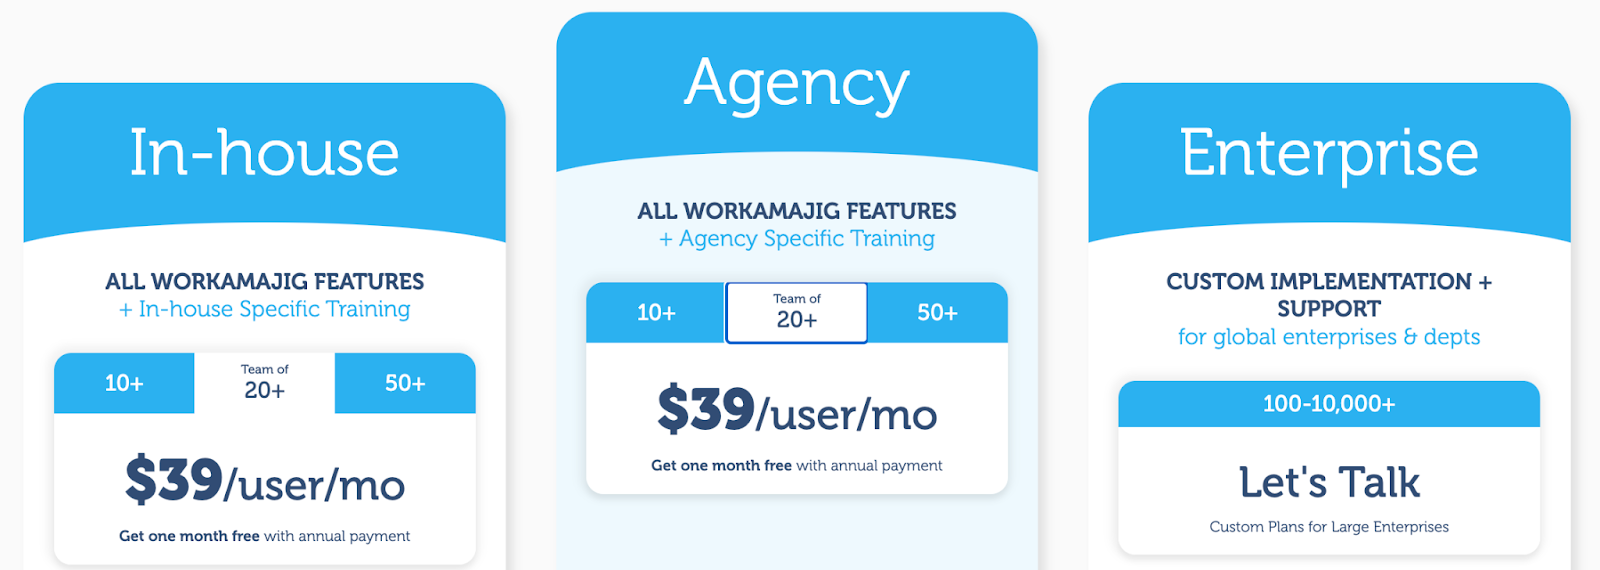 Workamajig pricing options: In-house, Agency, and Enterprise